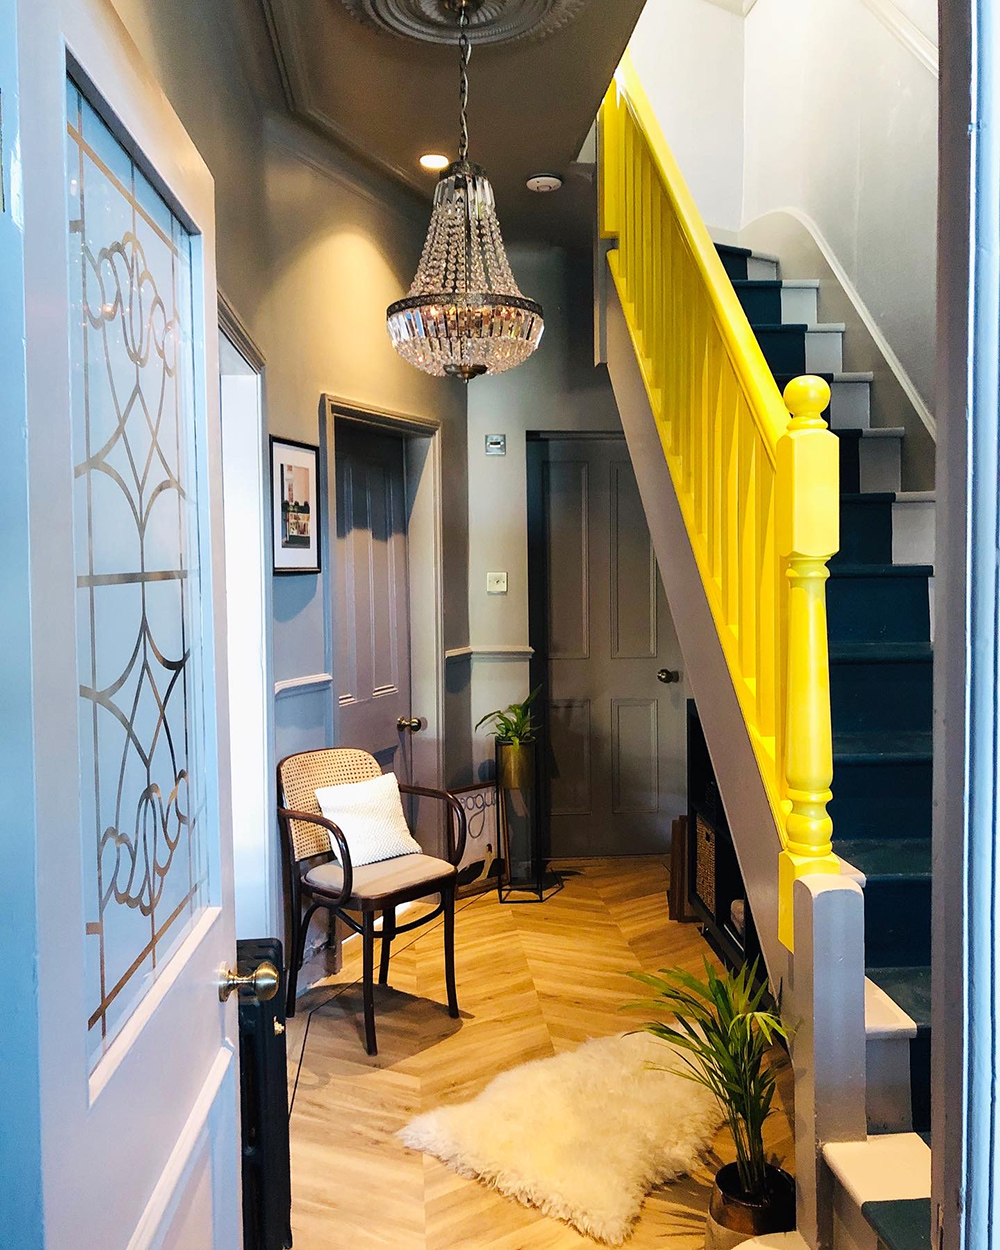 Edwardian period home with quirky decor and yellow bannister